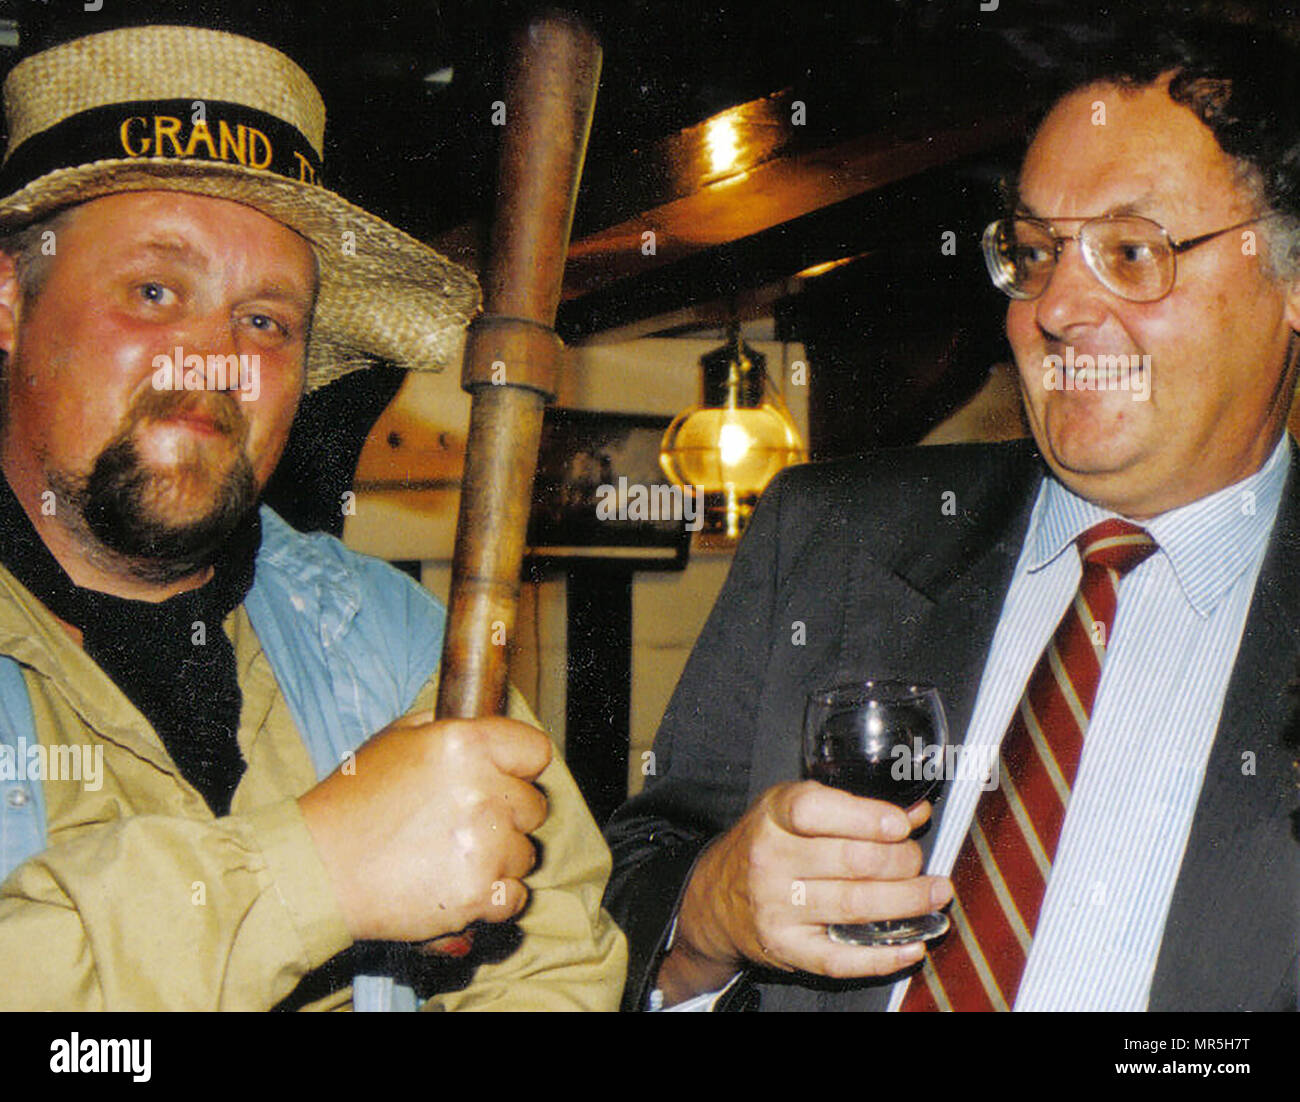 2006 - Visit of the Grand Turk sailing ship to Whitby, Yorkshire, A baton wielding crewman ceremoniously threatens a guest  (Colin Waters, local Archives & Heritage Centre Director) at the official reception below decks. Stock Photo